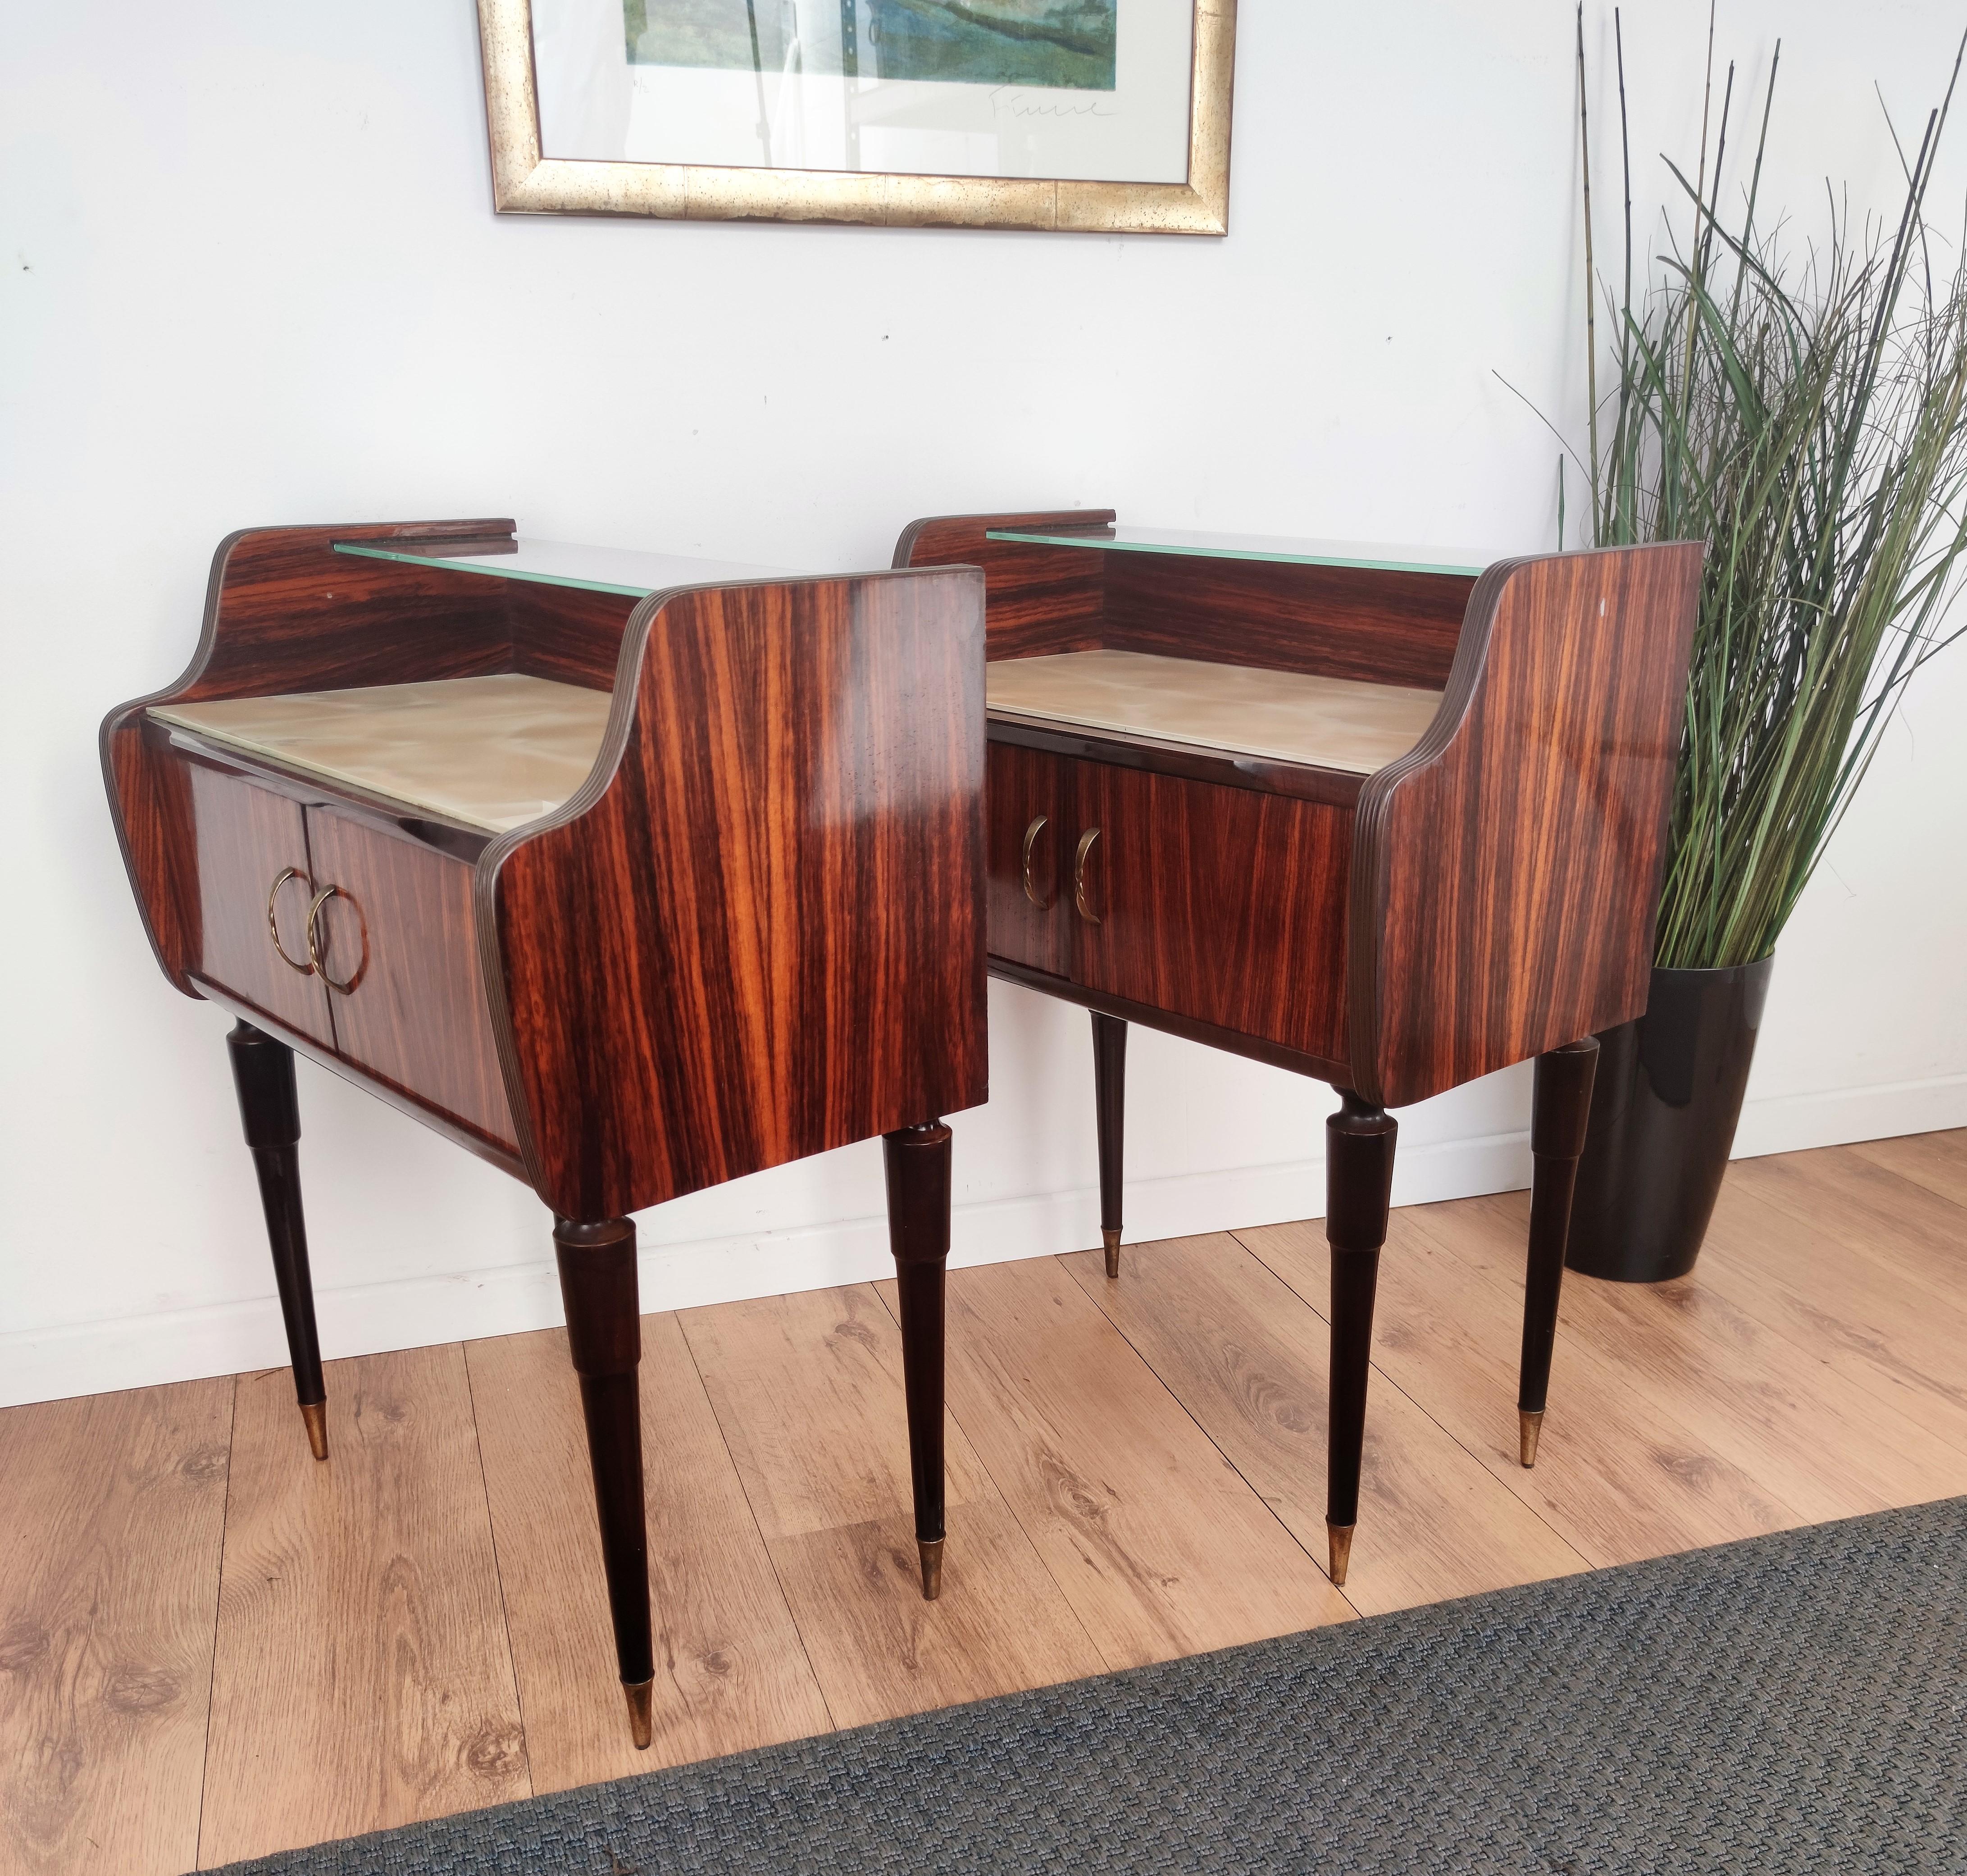 Italian Midcentury Art Deco Nightstands Bed Side Tables Wood Brass & Glass In Good Condition For Sale In Carimate, Como